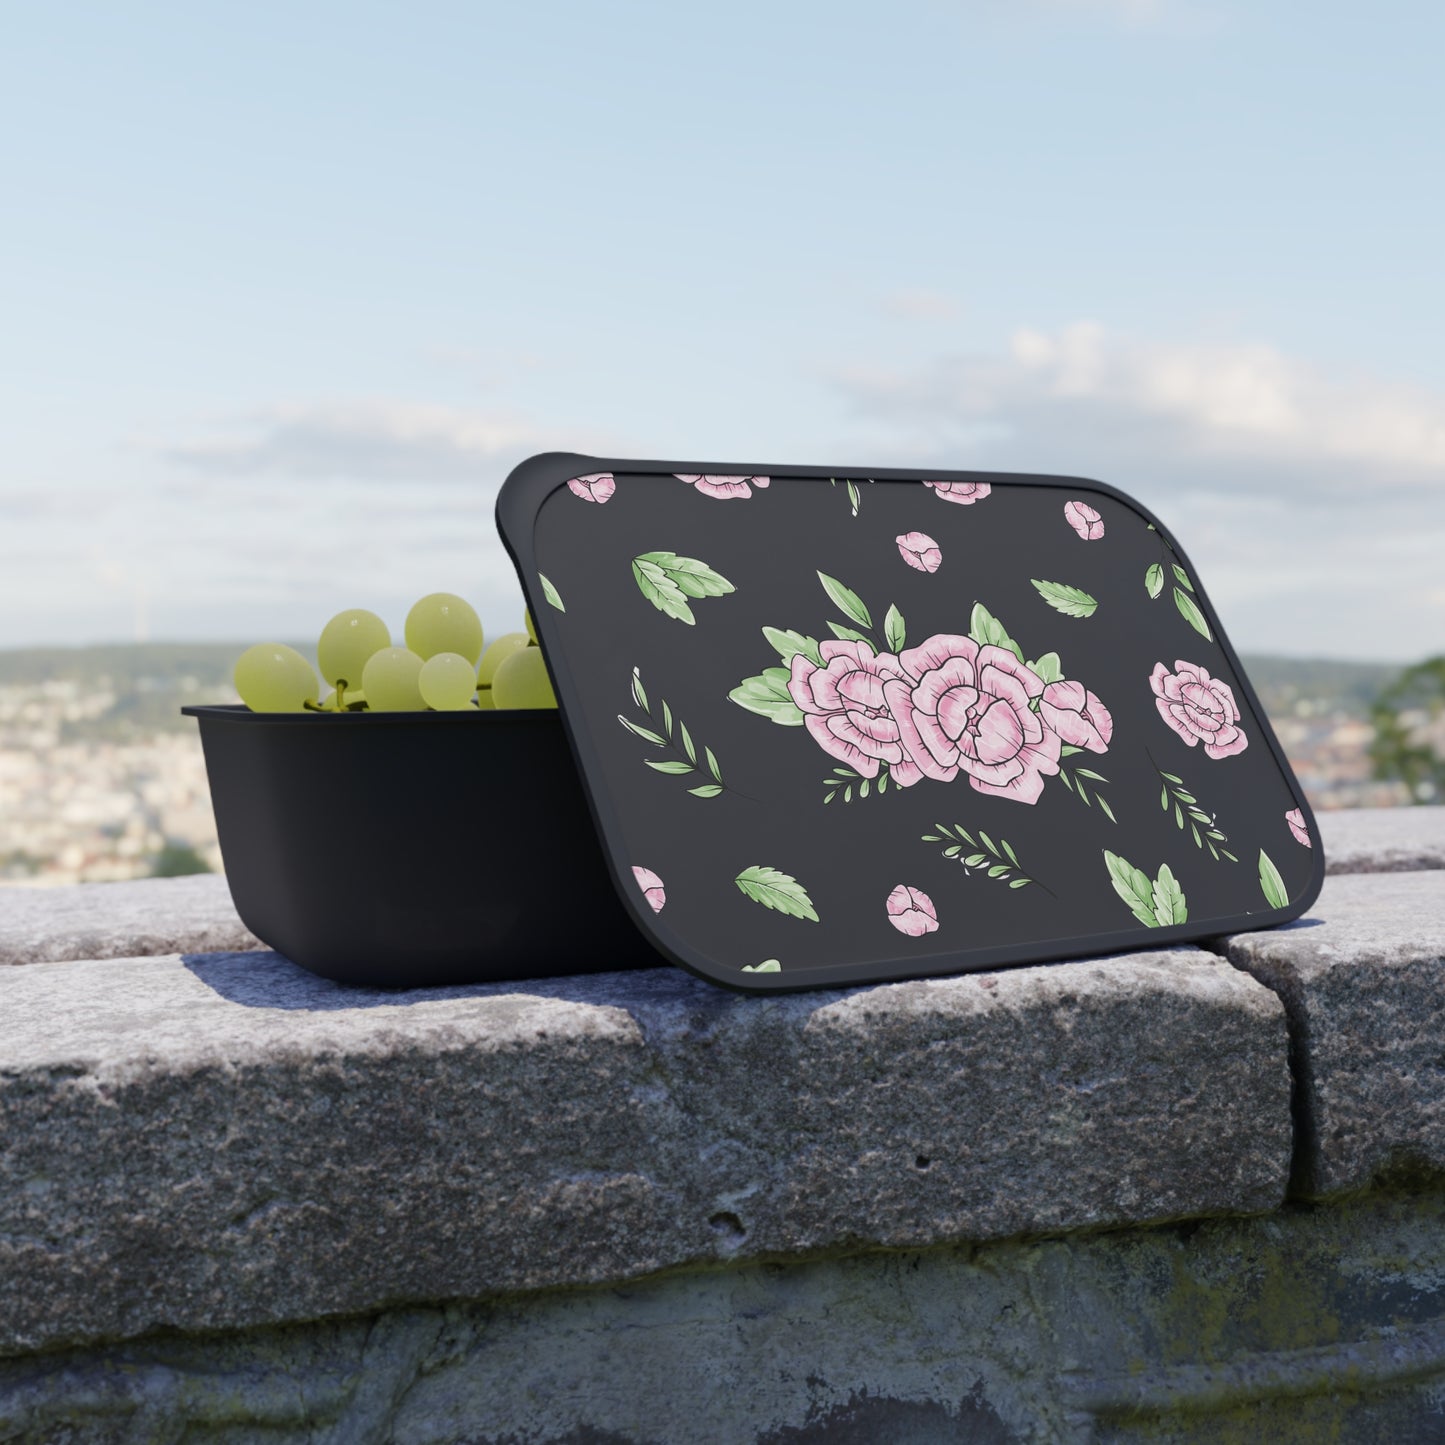 Peonies Bento Box with Band and Utensils